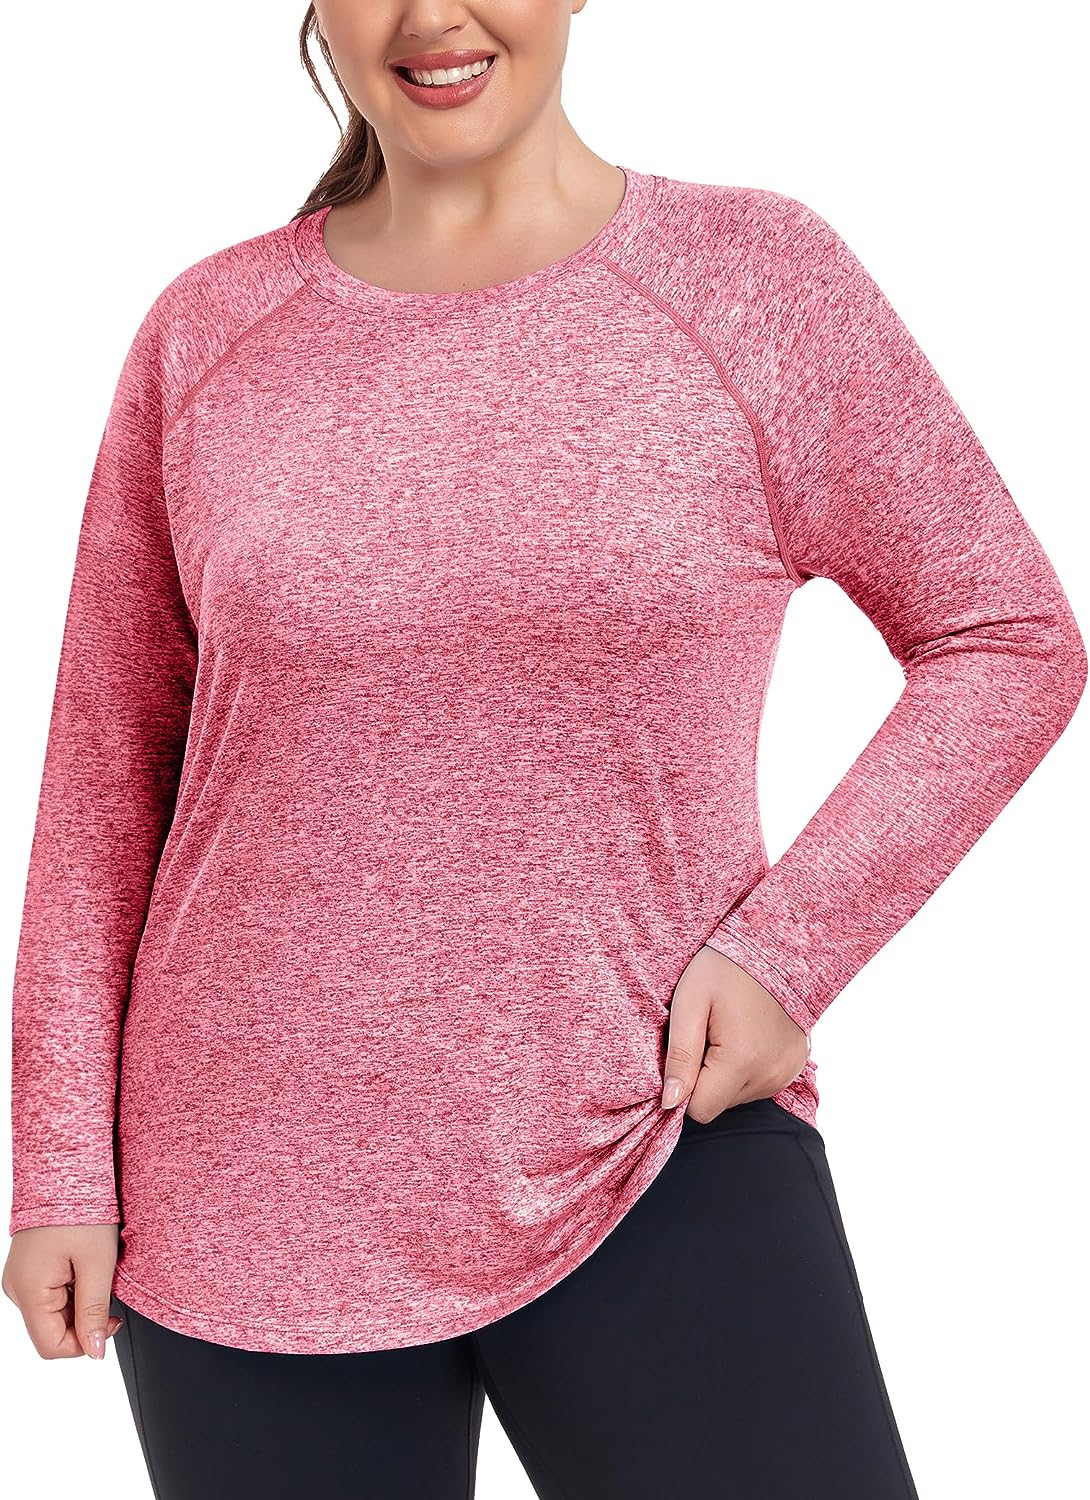 COOTRY Plus Size Workout Tops for Women Long Sleeve Loose Fit Shirts  Athletic Yo